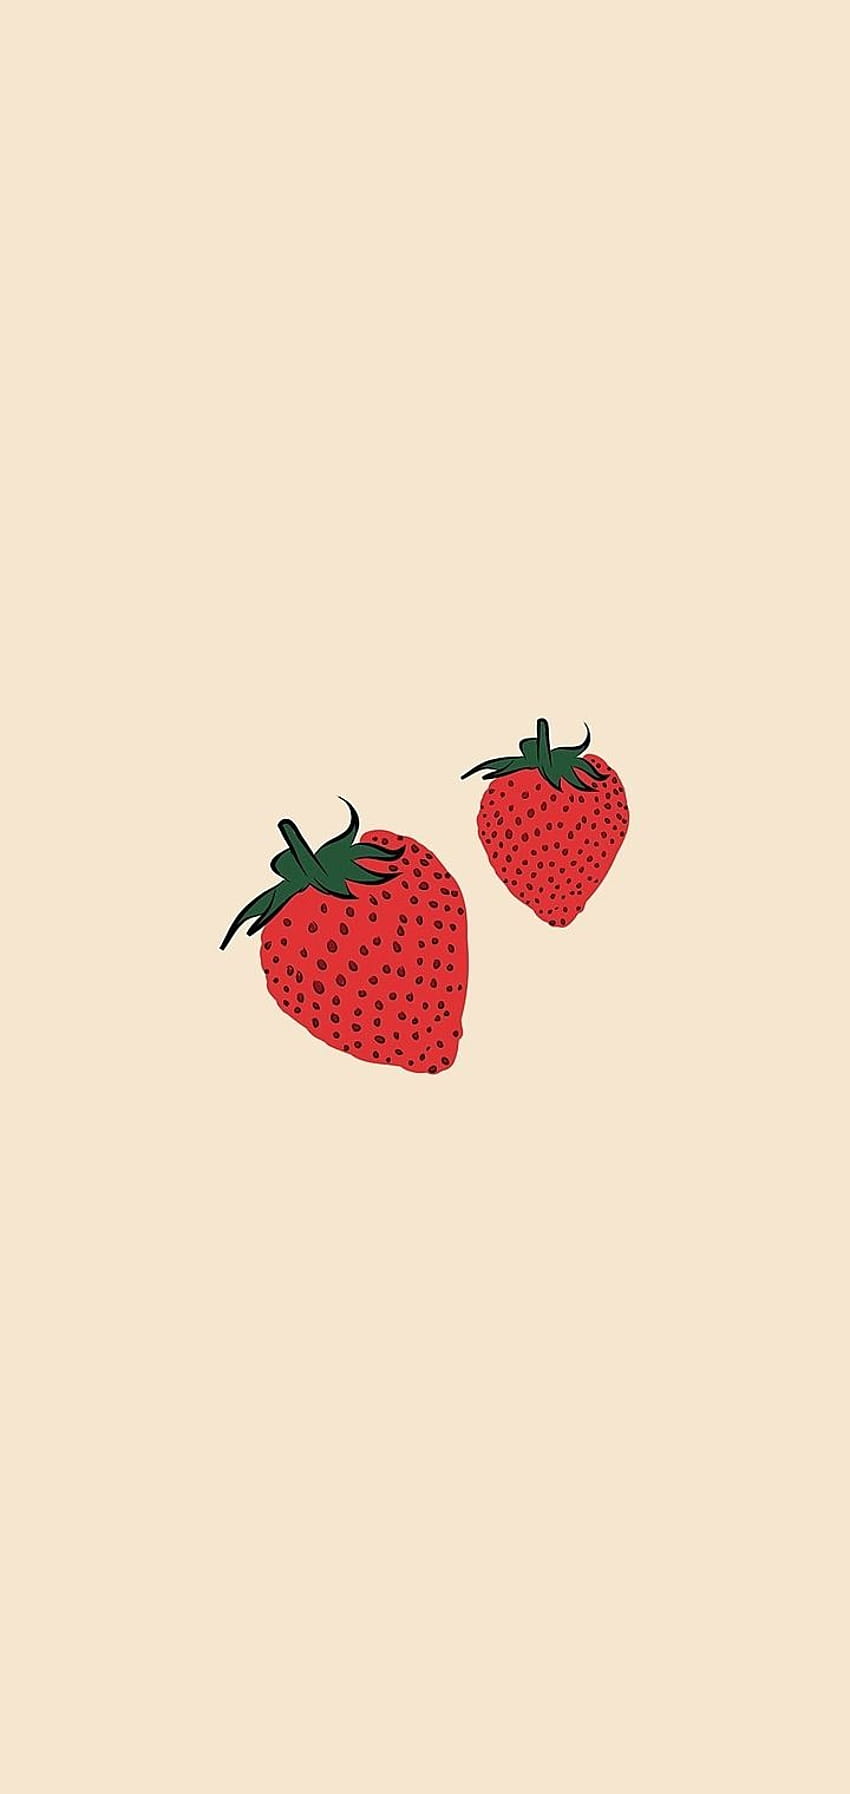 Strawberry Tumblr posts, cute aesthetic strawberry HD phone wallpaper